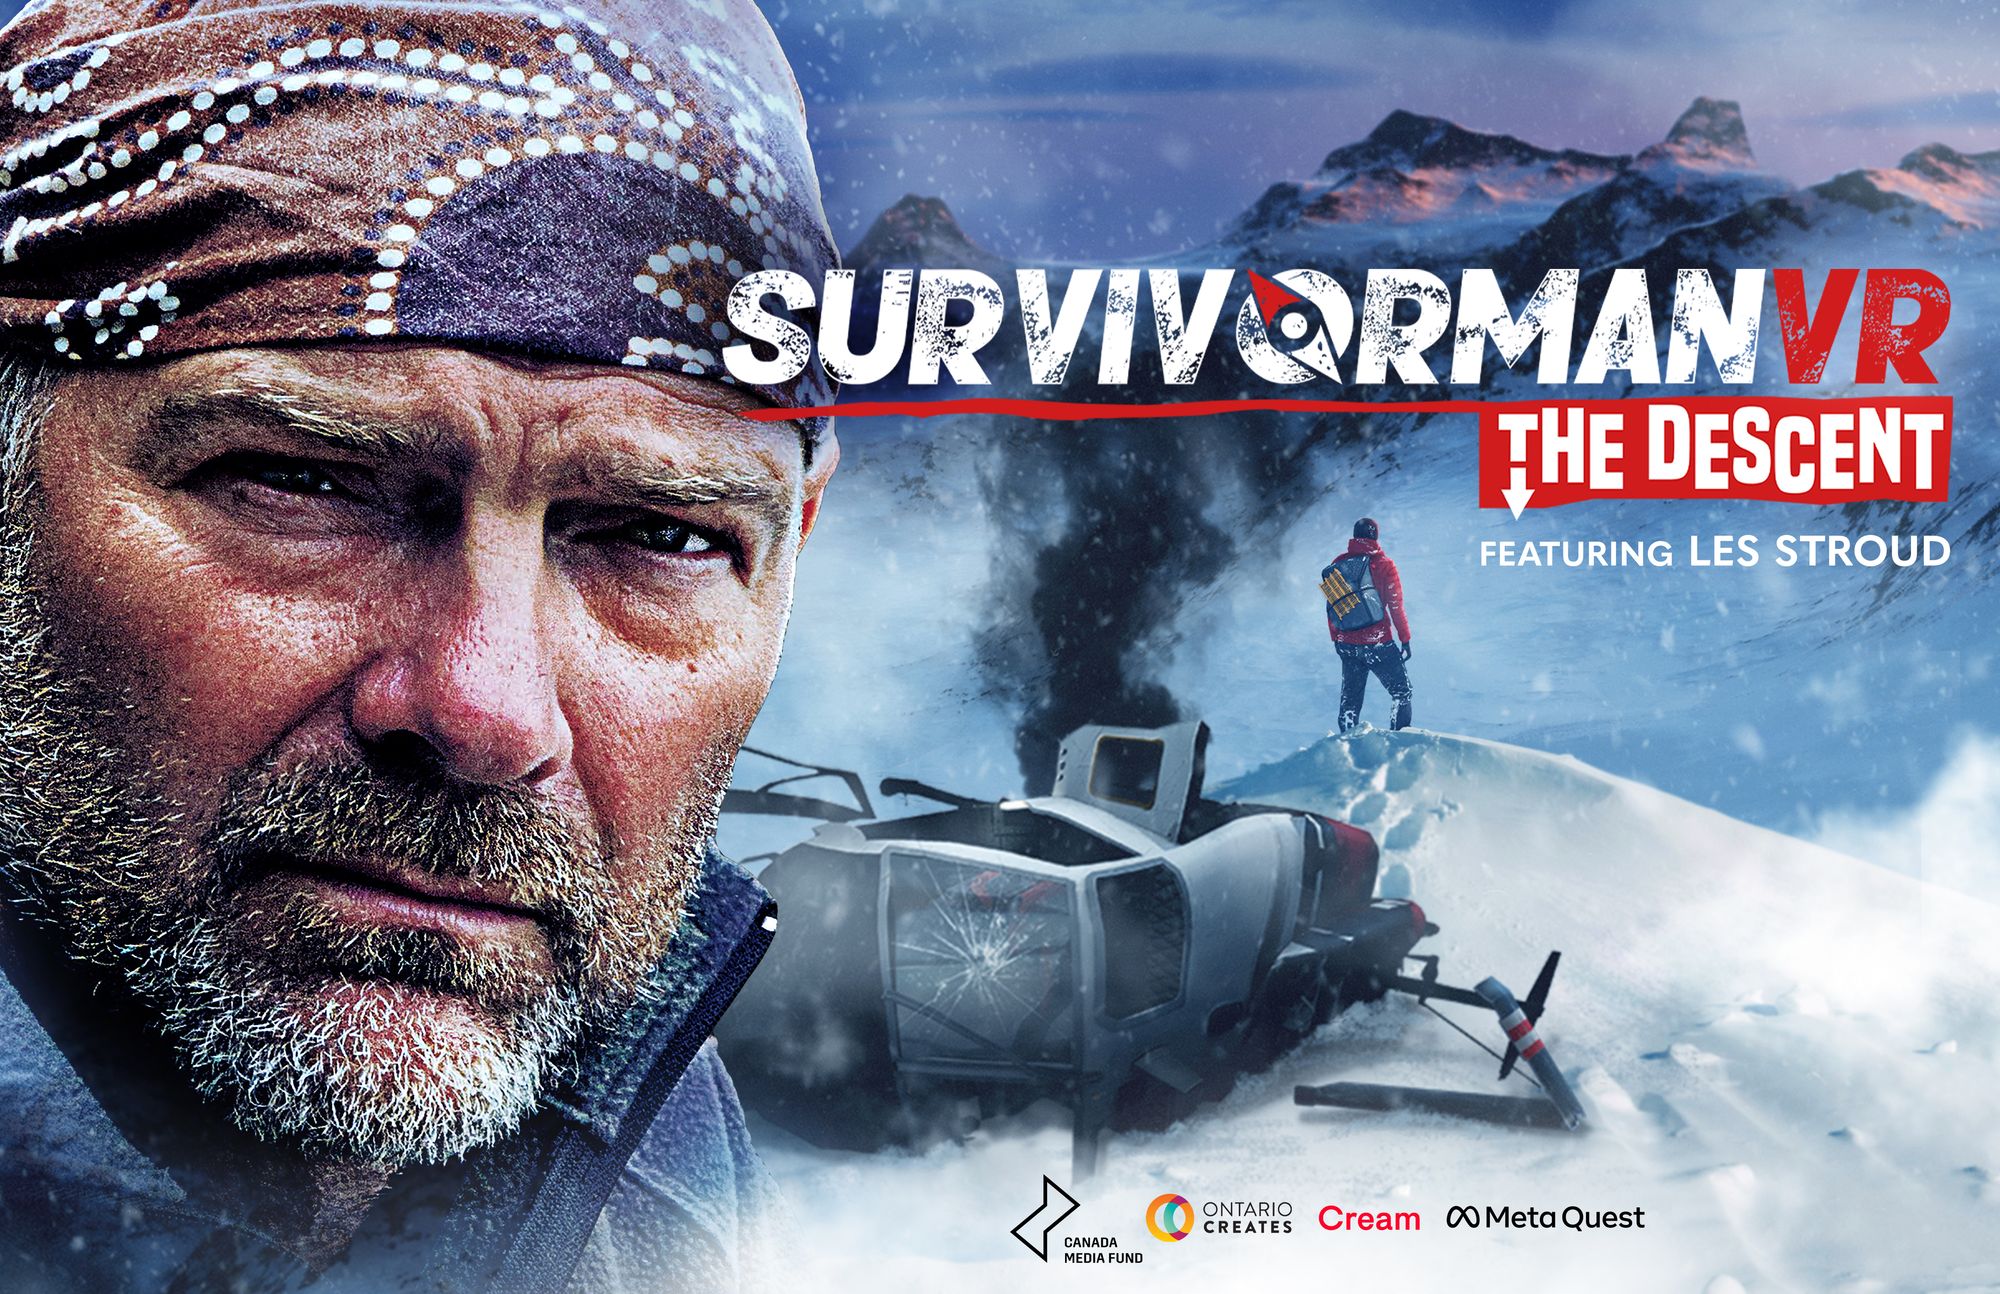 Meta Quest 2 and 3 Welcome 'Survivorman VR: The Descent', Featuring Les Stroud, Launching Later This Month